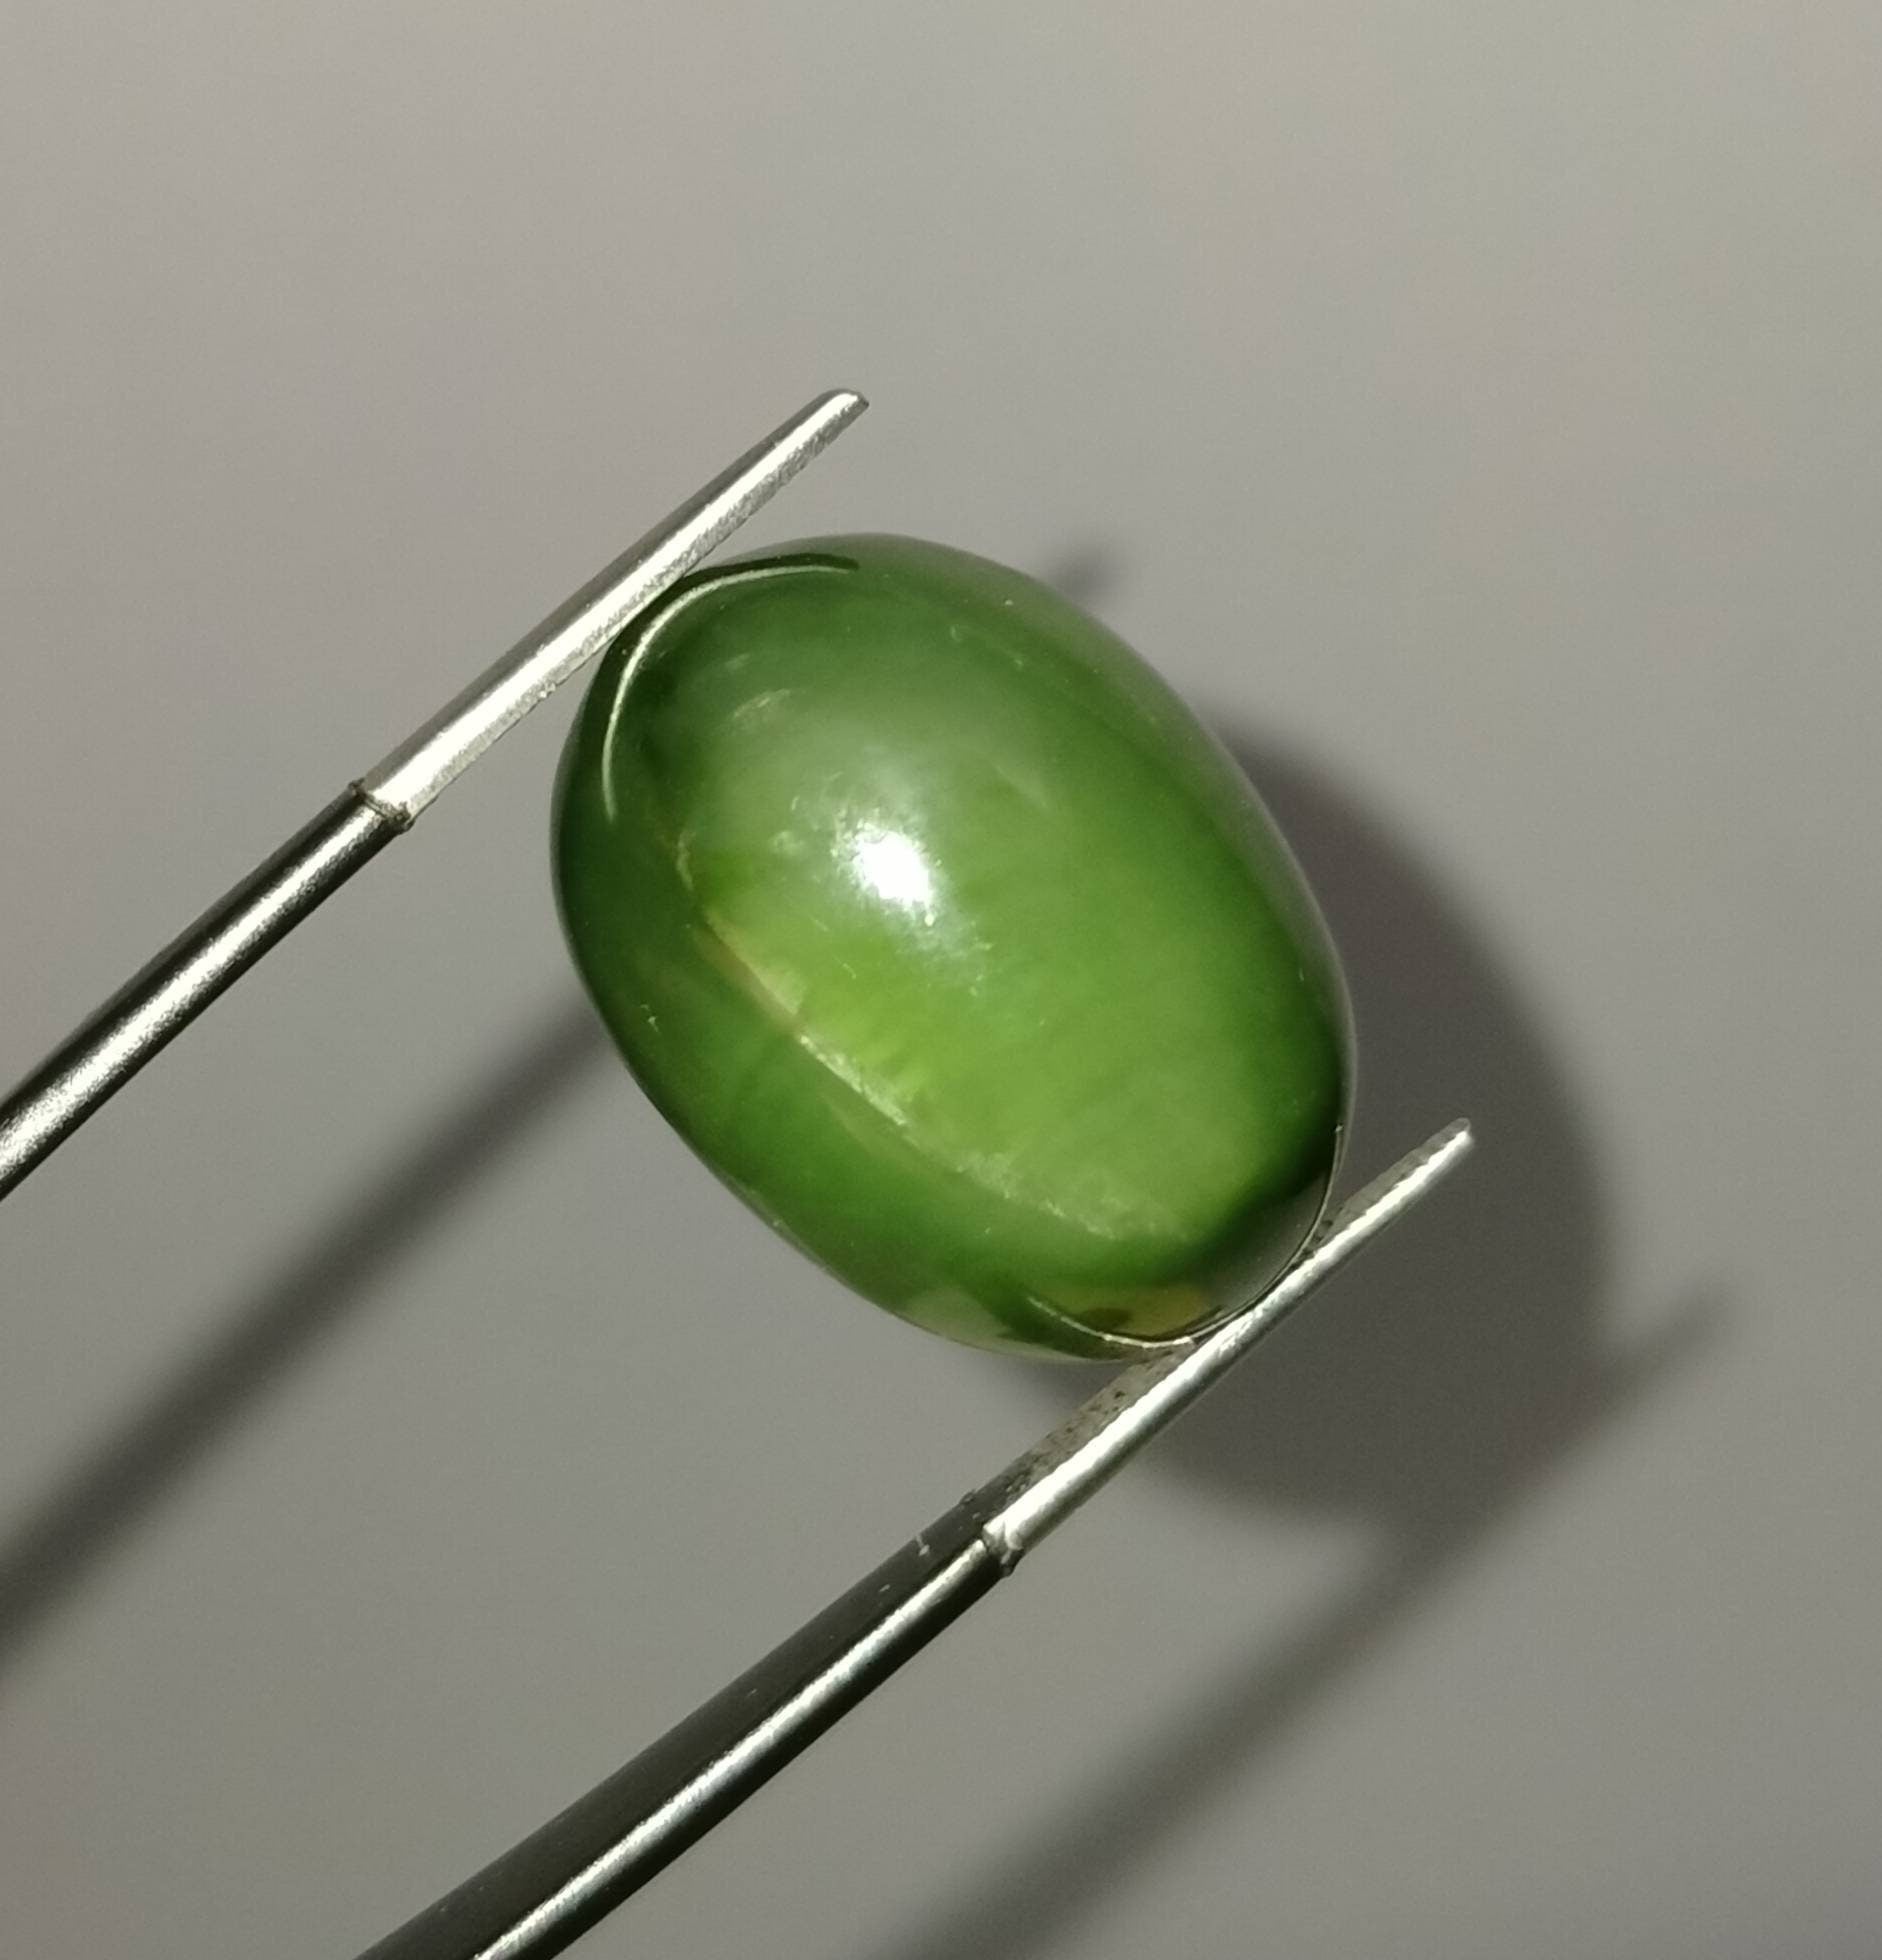 ARSAA GEMS AND MINERALSNatural fine quality beautiful 28 carats cats eye nephrite Jade Cabochon - Premium  from ARSAA GEMS AND MINERALS - Just $48.00! Shop now at ARSAA GEMS AND MINERALS